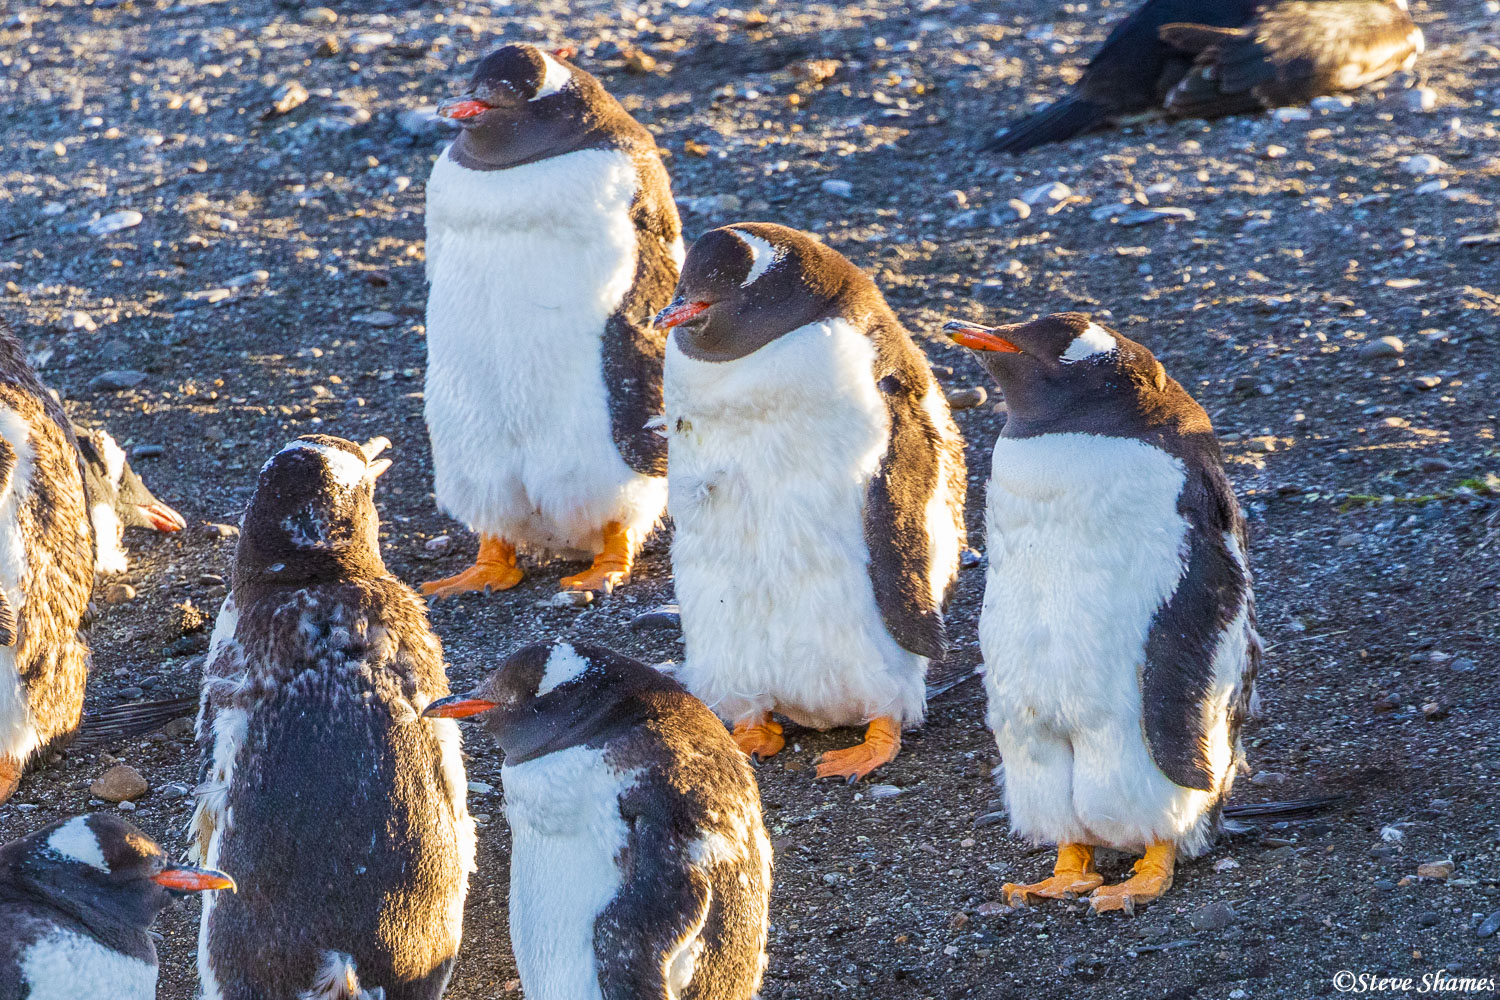 We come across some Patagonia penguins, on a little island in the Beagle Channel.